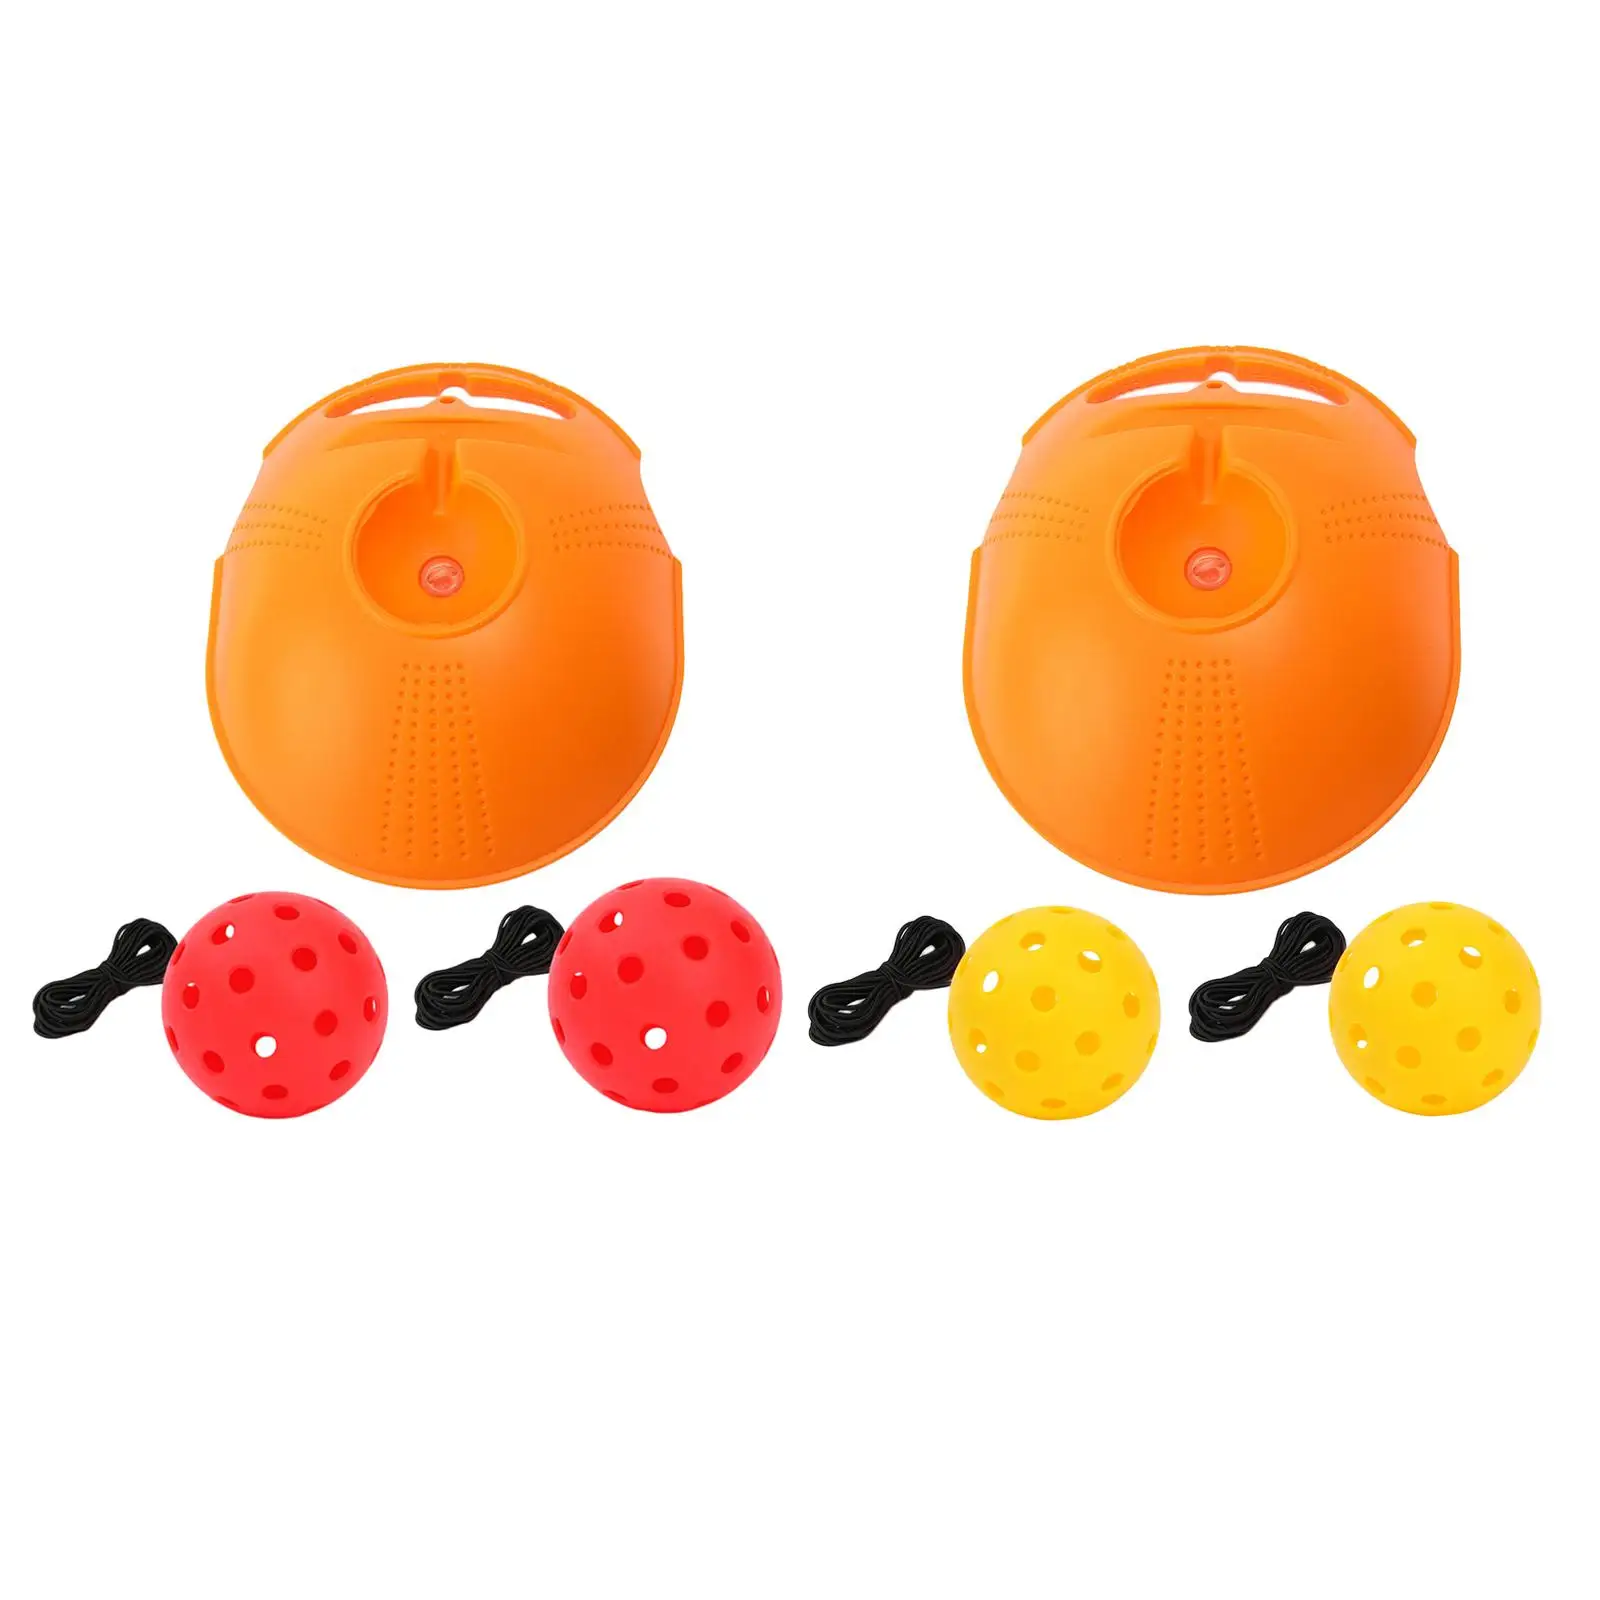 Pickleball Trainer Portable Baseboard with Elastic Rope Ball Improve Speed for Single Player Pickleball Lover Indoor Outdoor